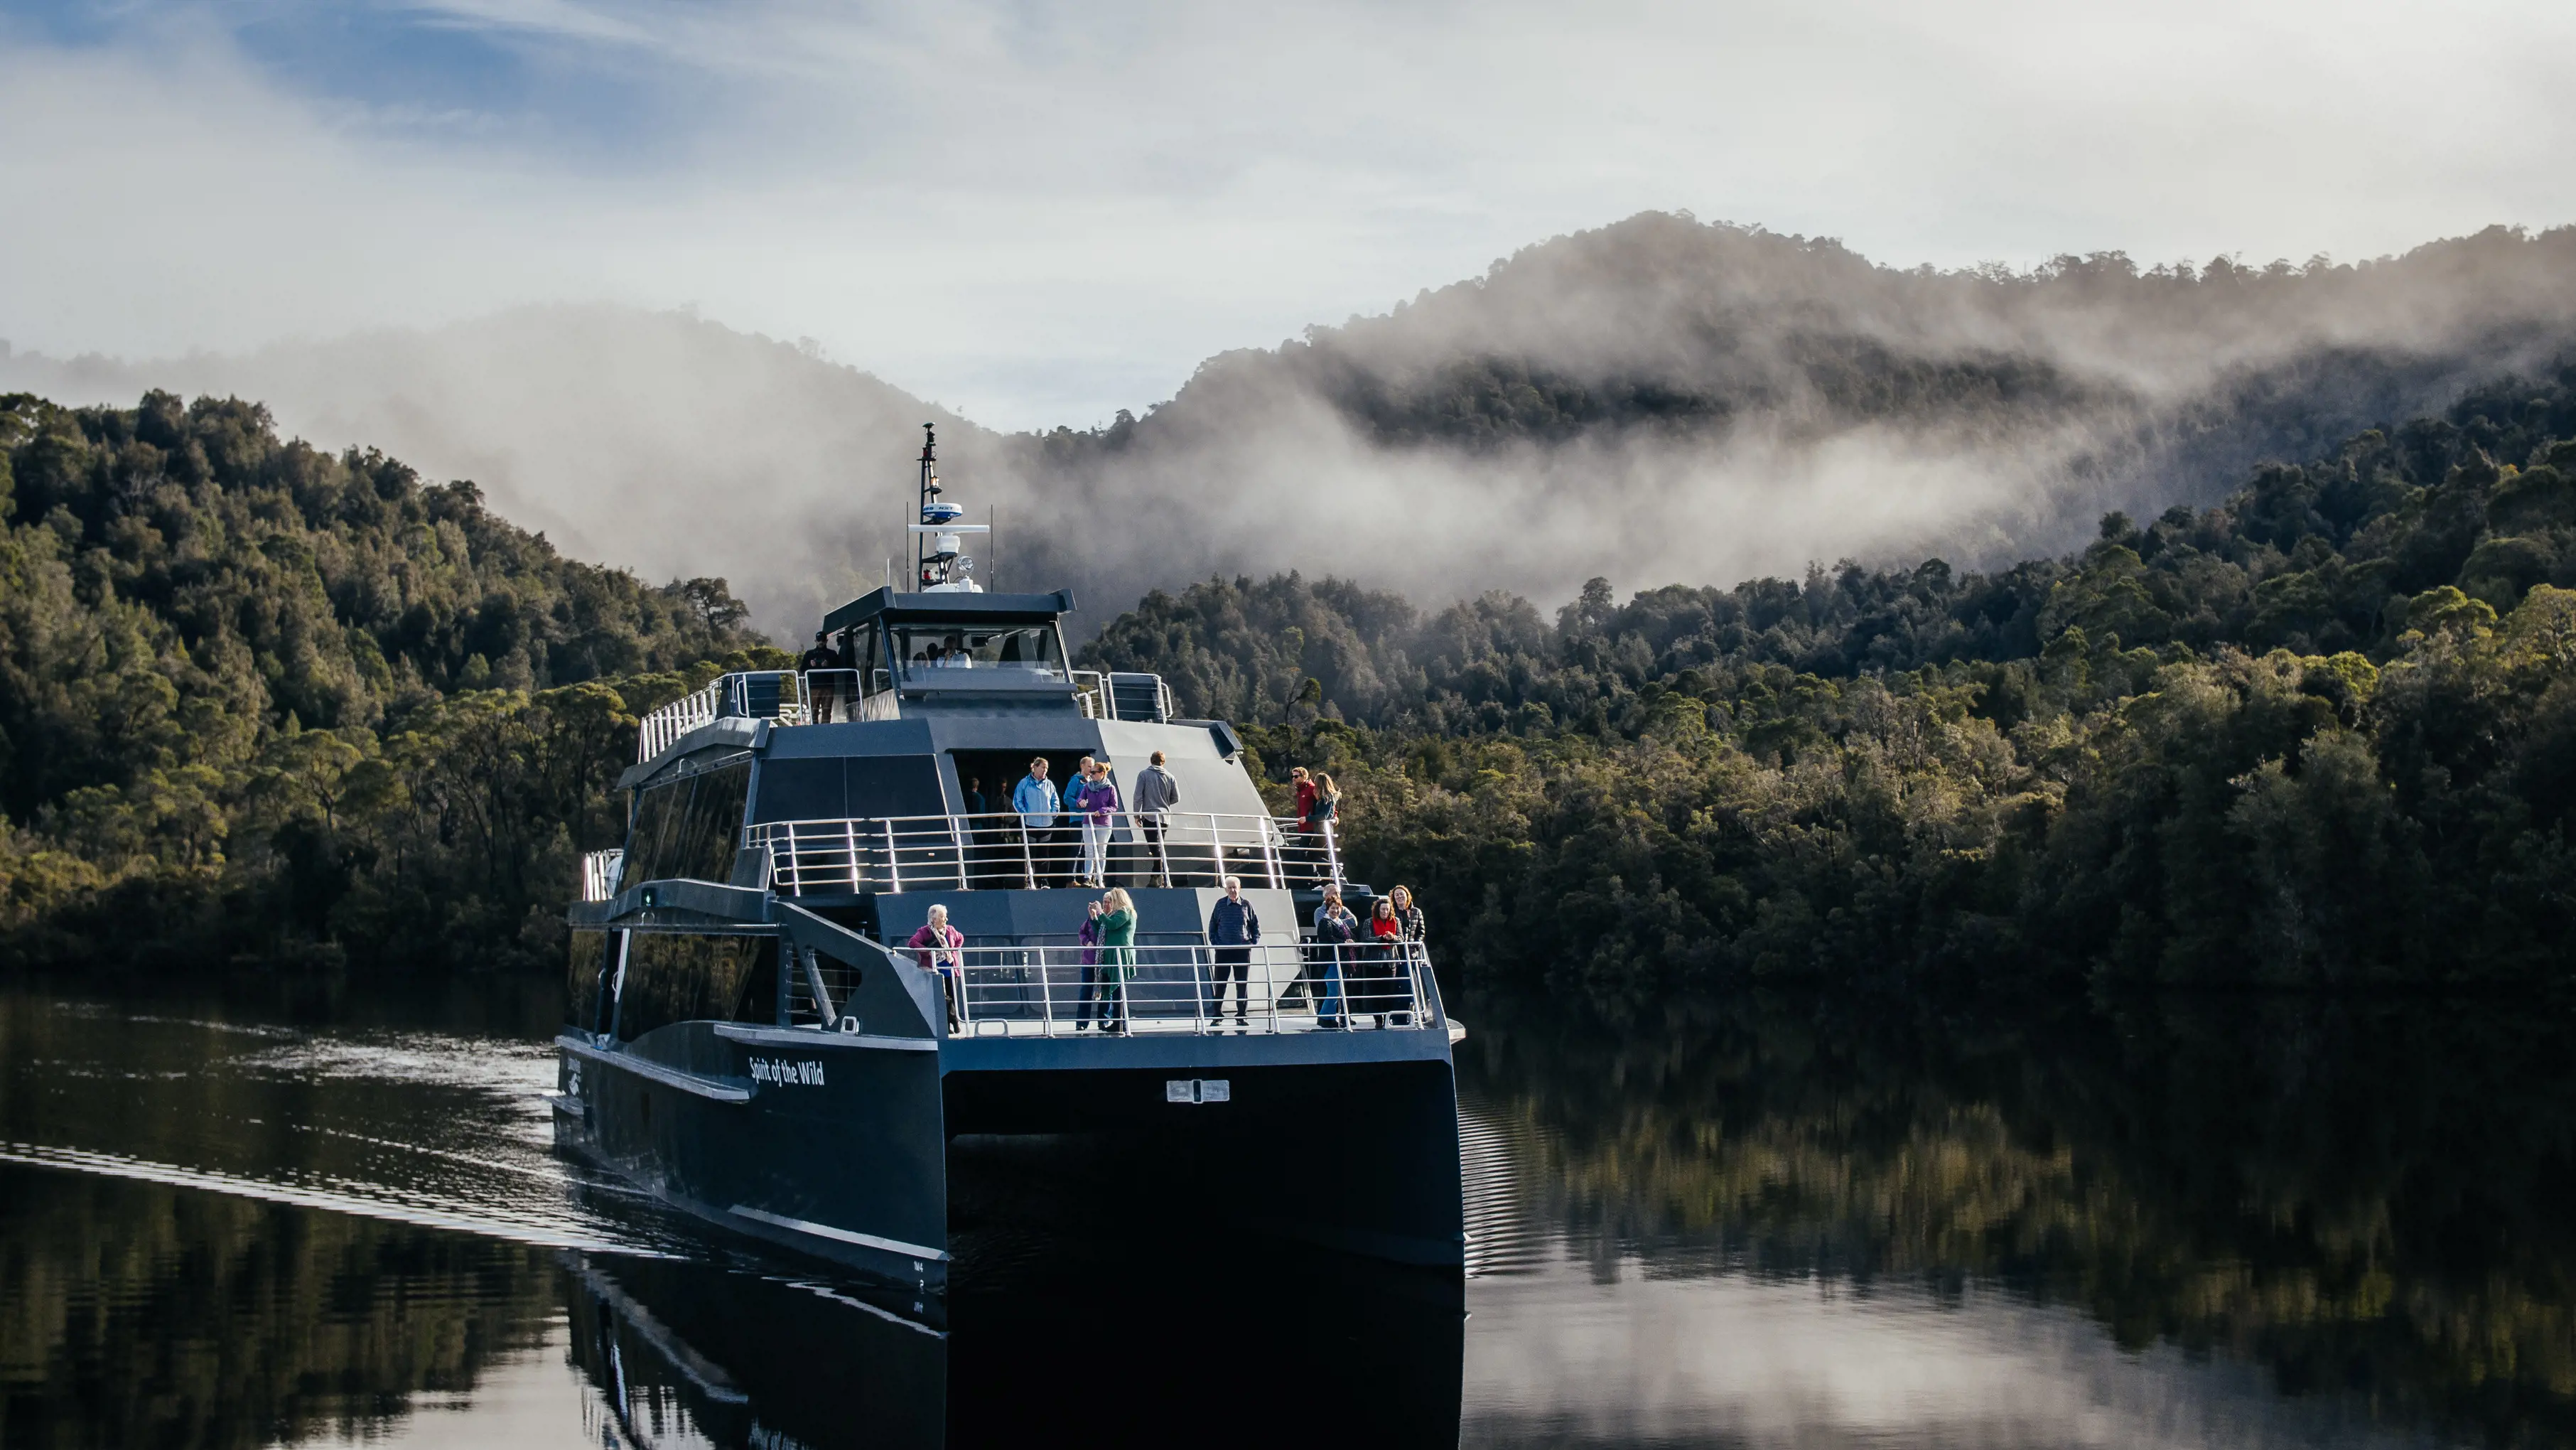 Spectacular image of Gordon River Cruises with people at the front of the boat, piloting through Gordon River, surrounded by lush forest.